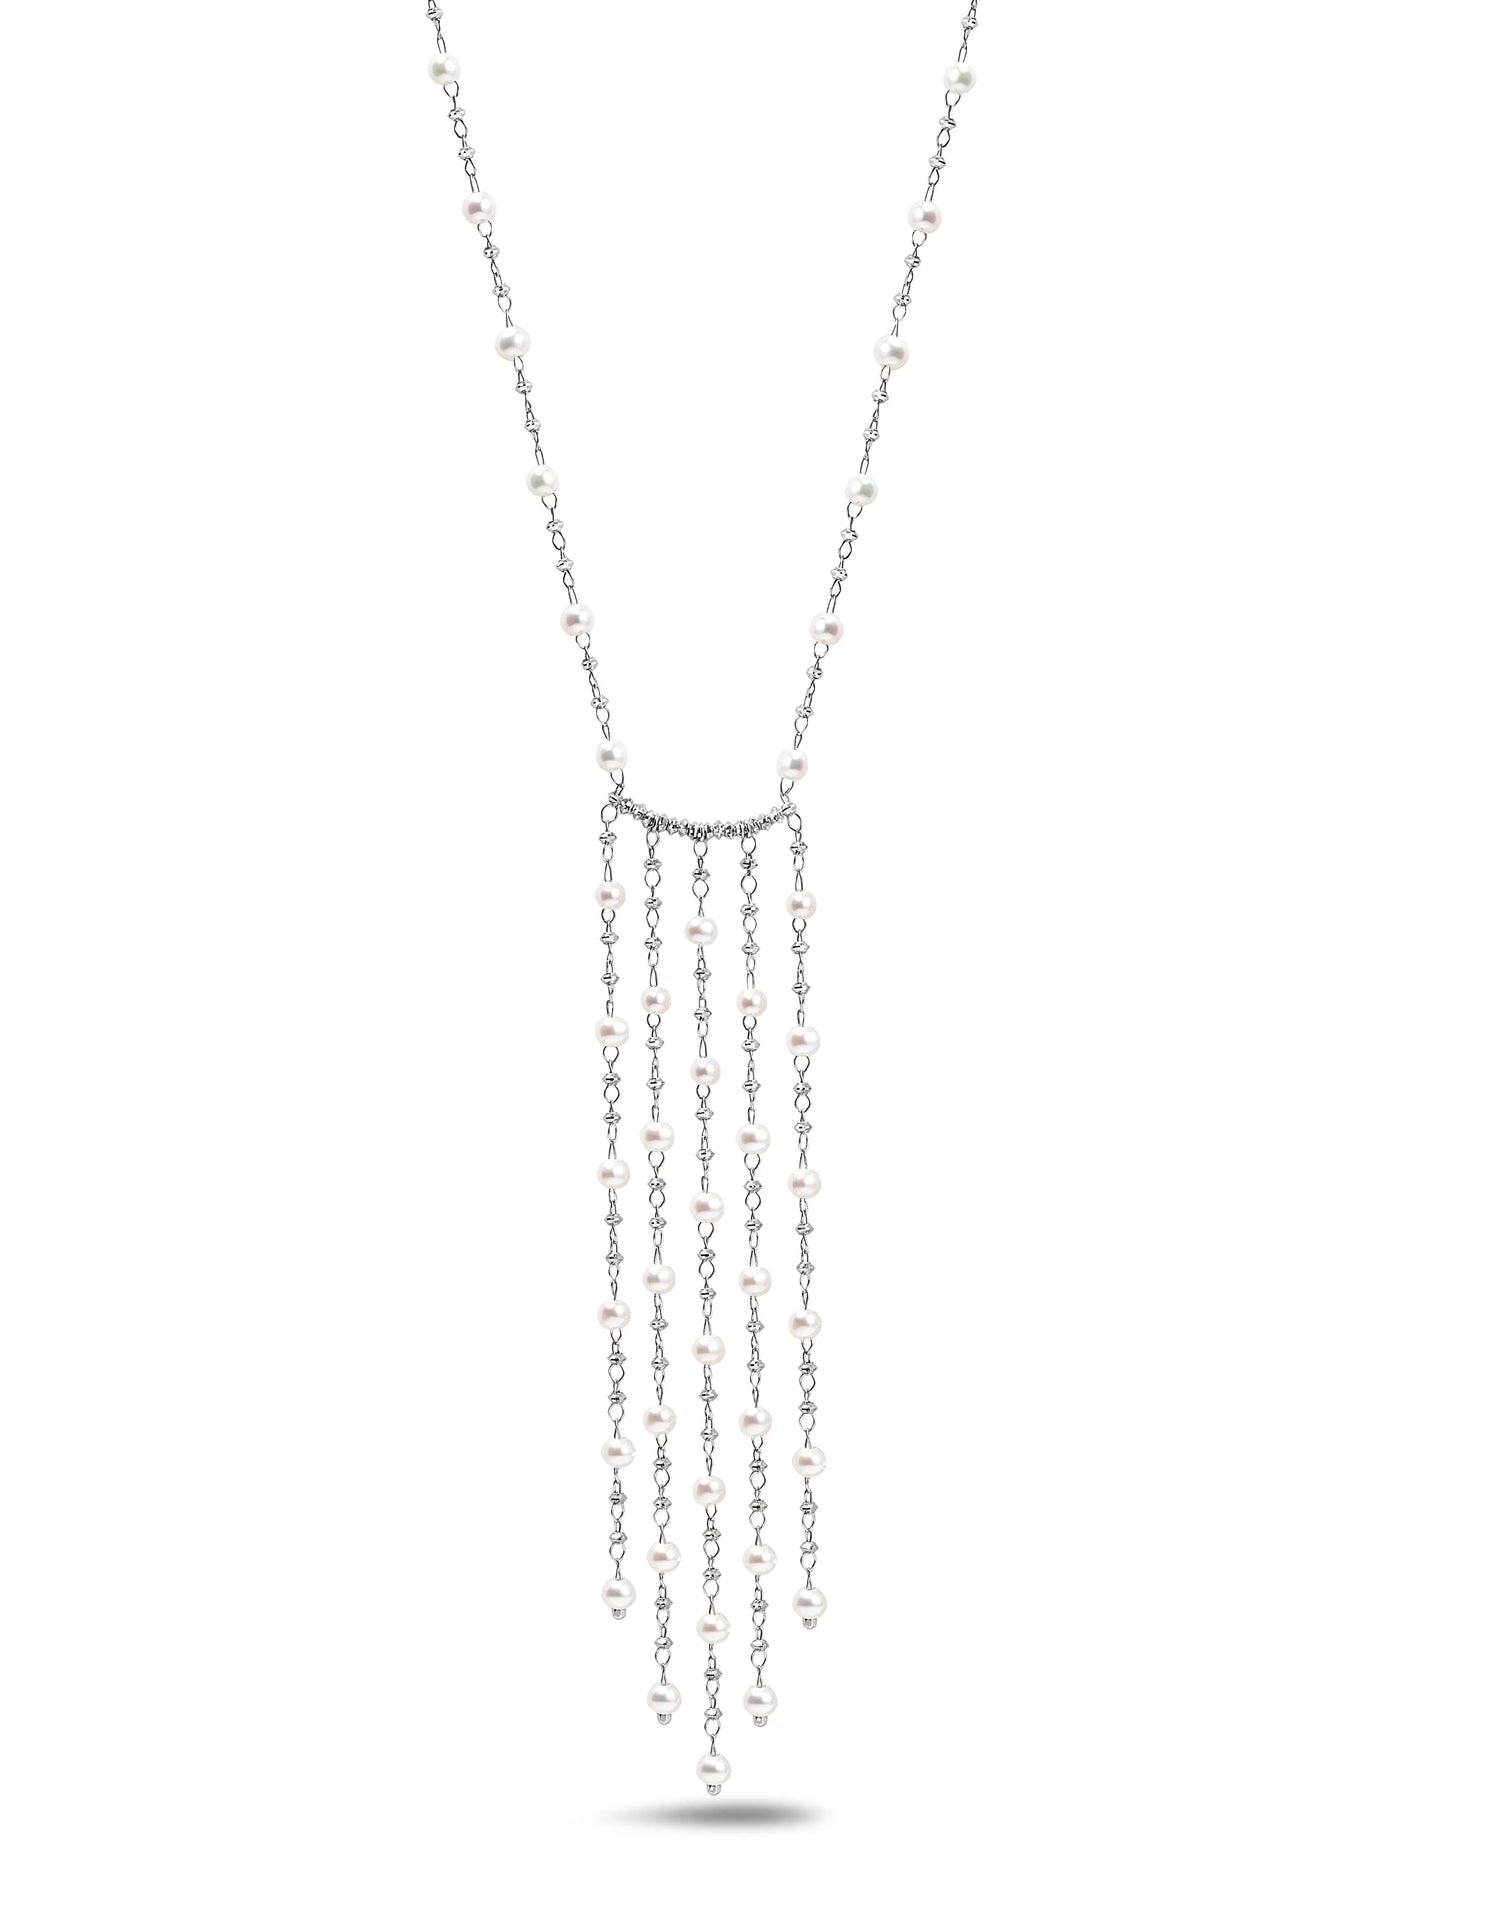 A stunning statement in brilliant-cut platinum beads and freshwater pearls. The single chain culminates in a dramatic centerpiece, where a curtain of multiple hand-threaded chains drop from a platinum bar.  Product Details:  Platinum No Clasp 27.56 Inches Designed by Platinum Born